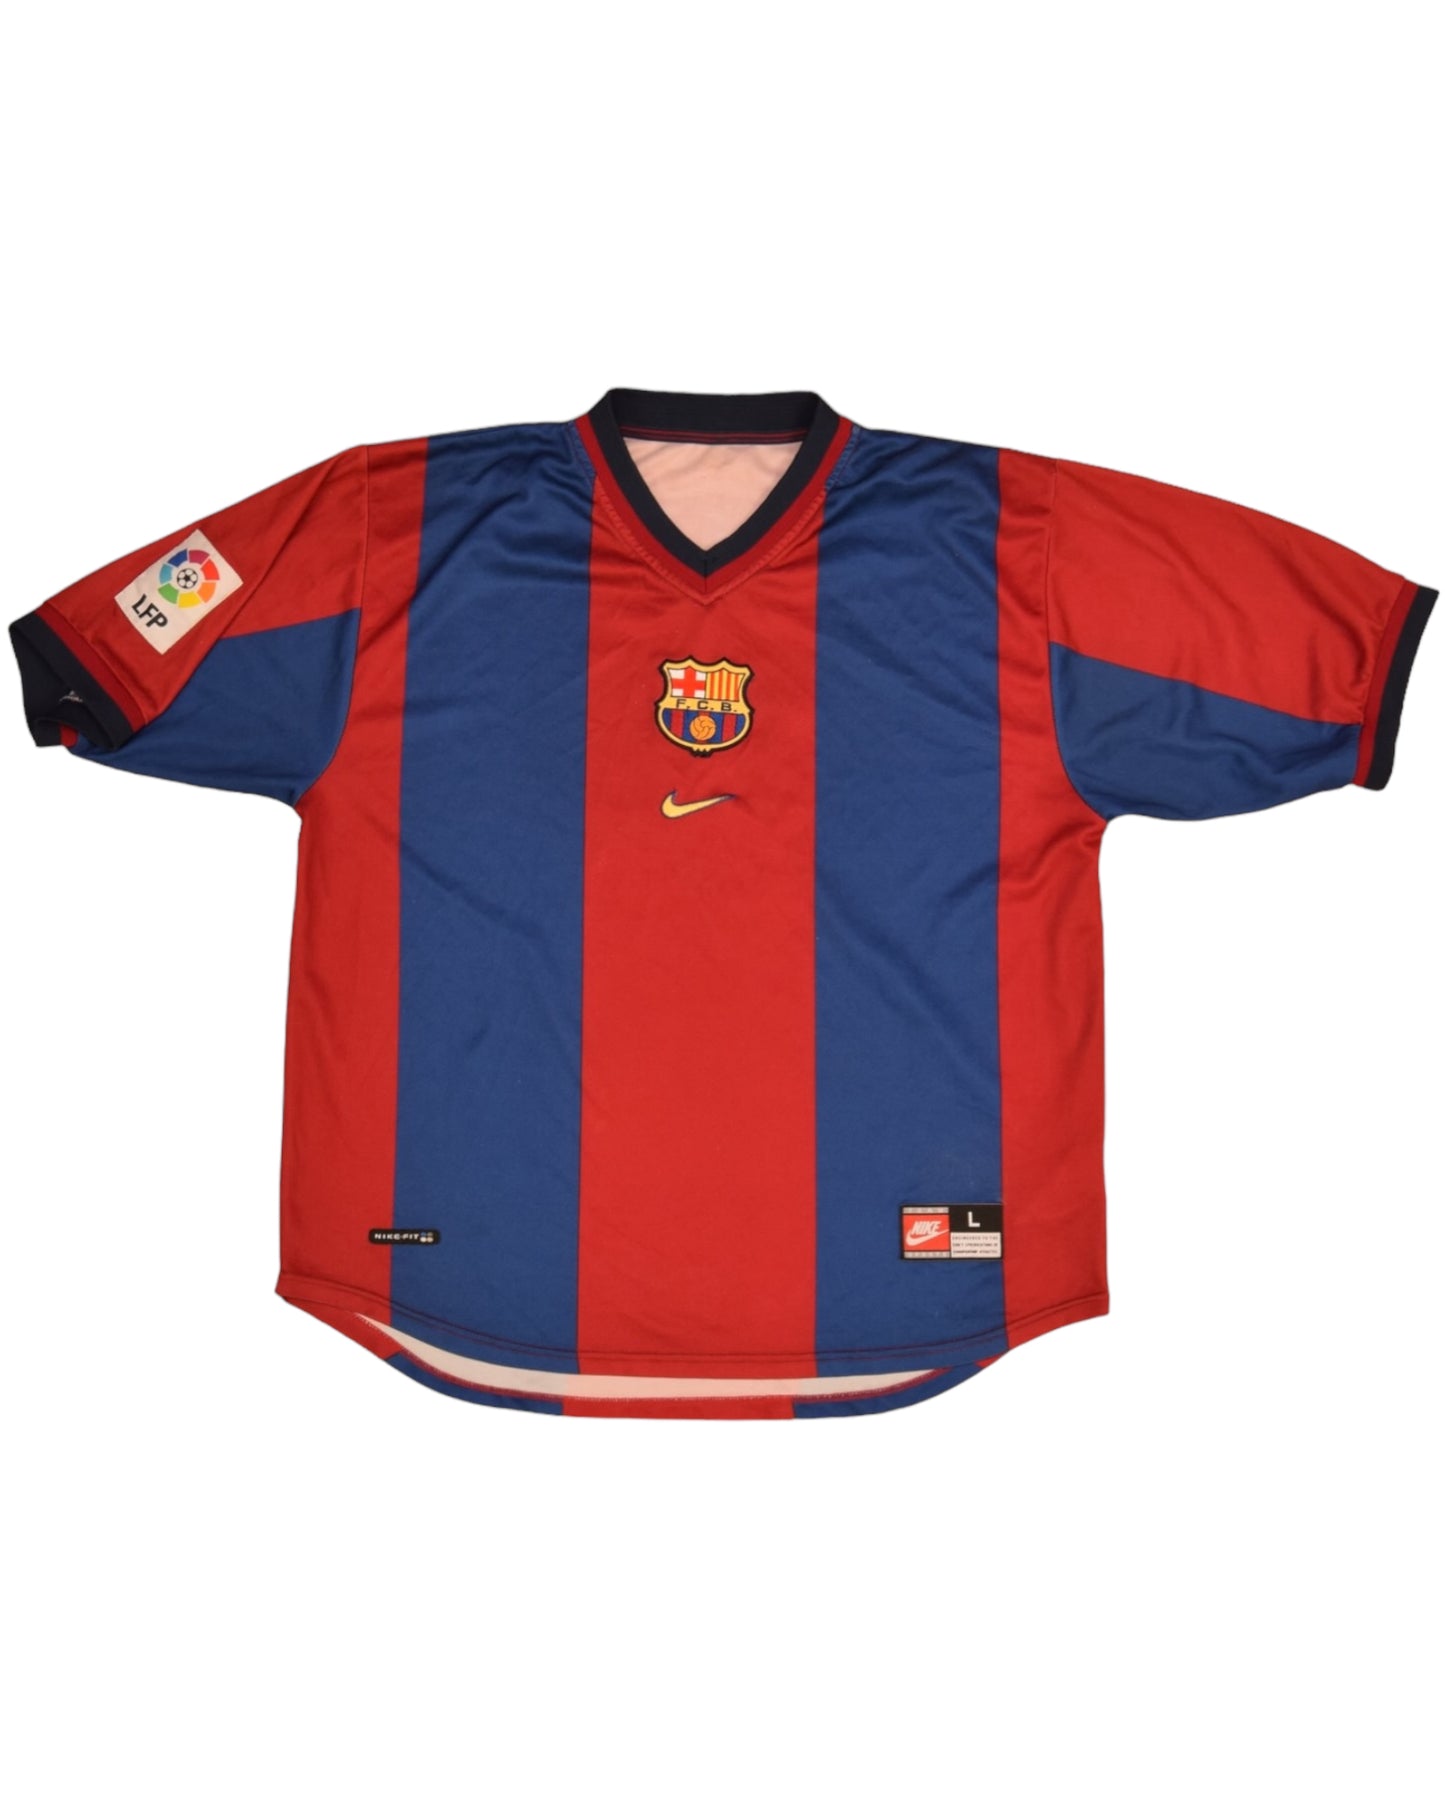  FC Barcelona Nike 1998 - 1999 Football Shirt Home Size L Red Blue Made in Portugal